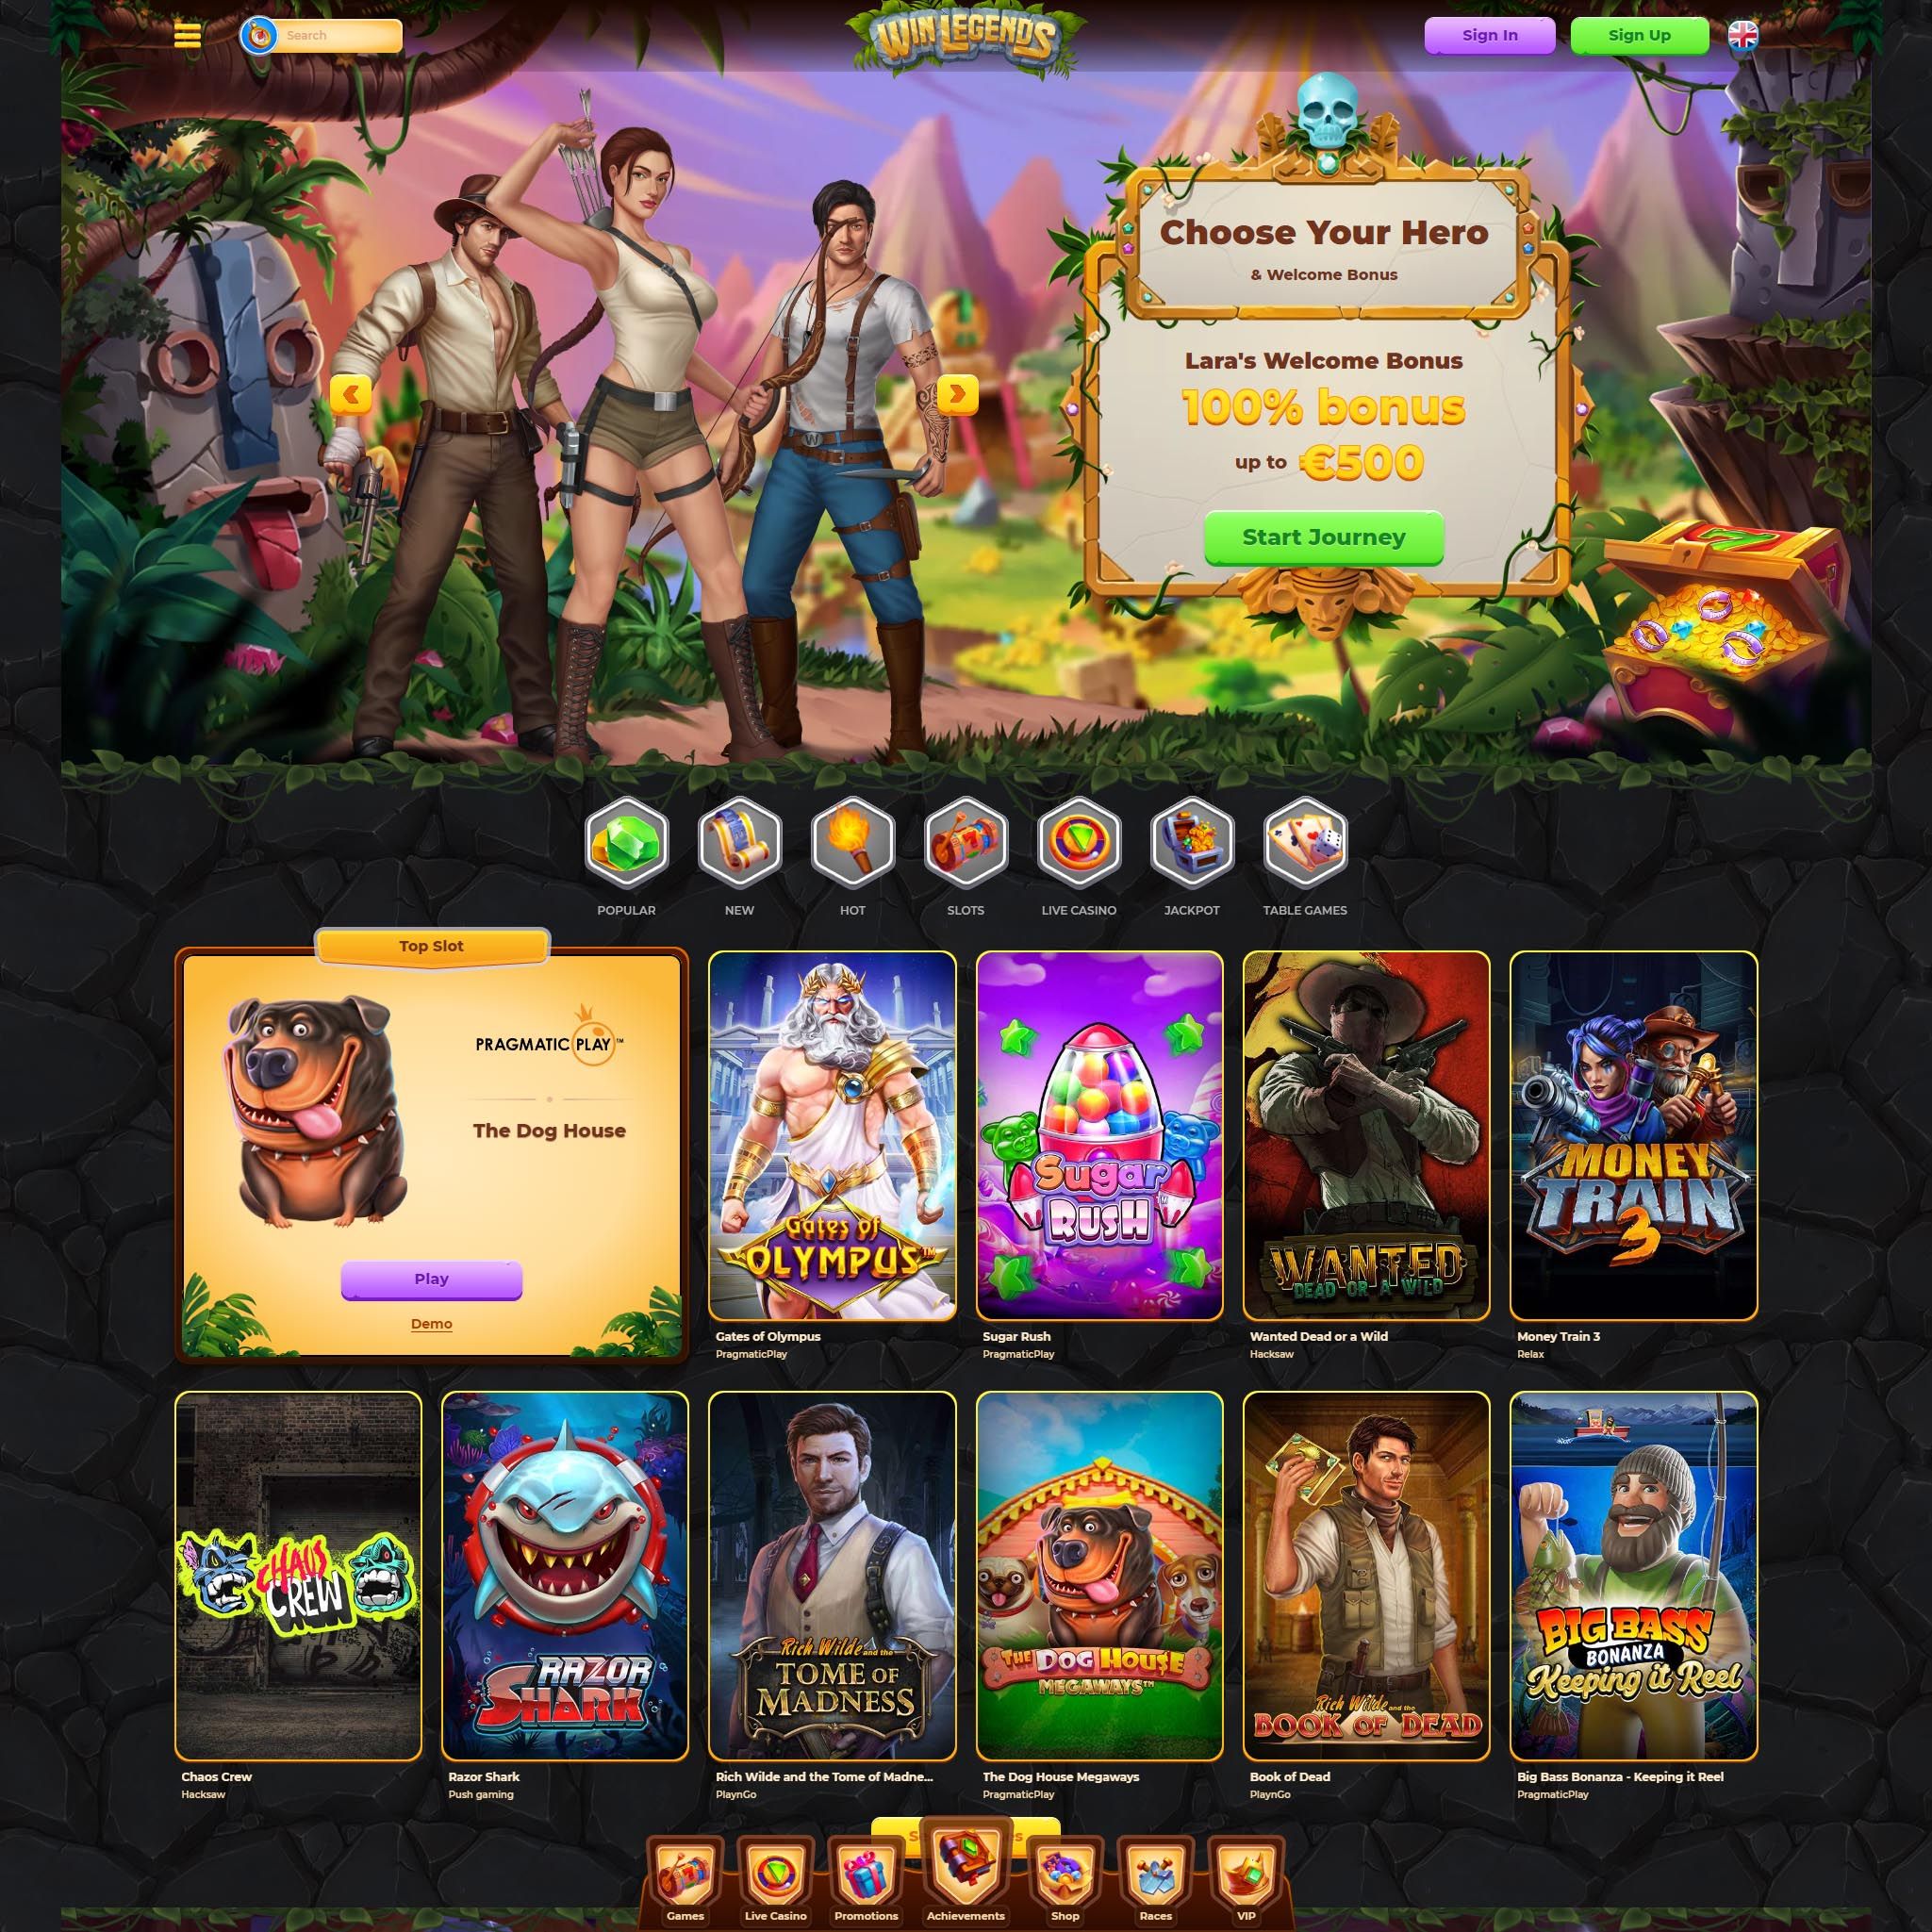 WinLegends Casino review by Mr. Gamble